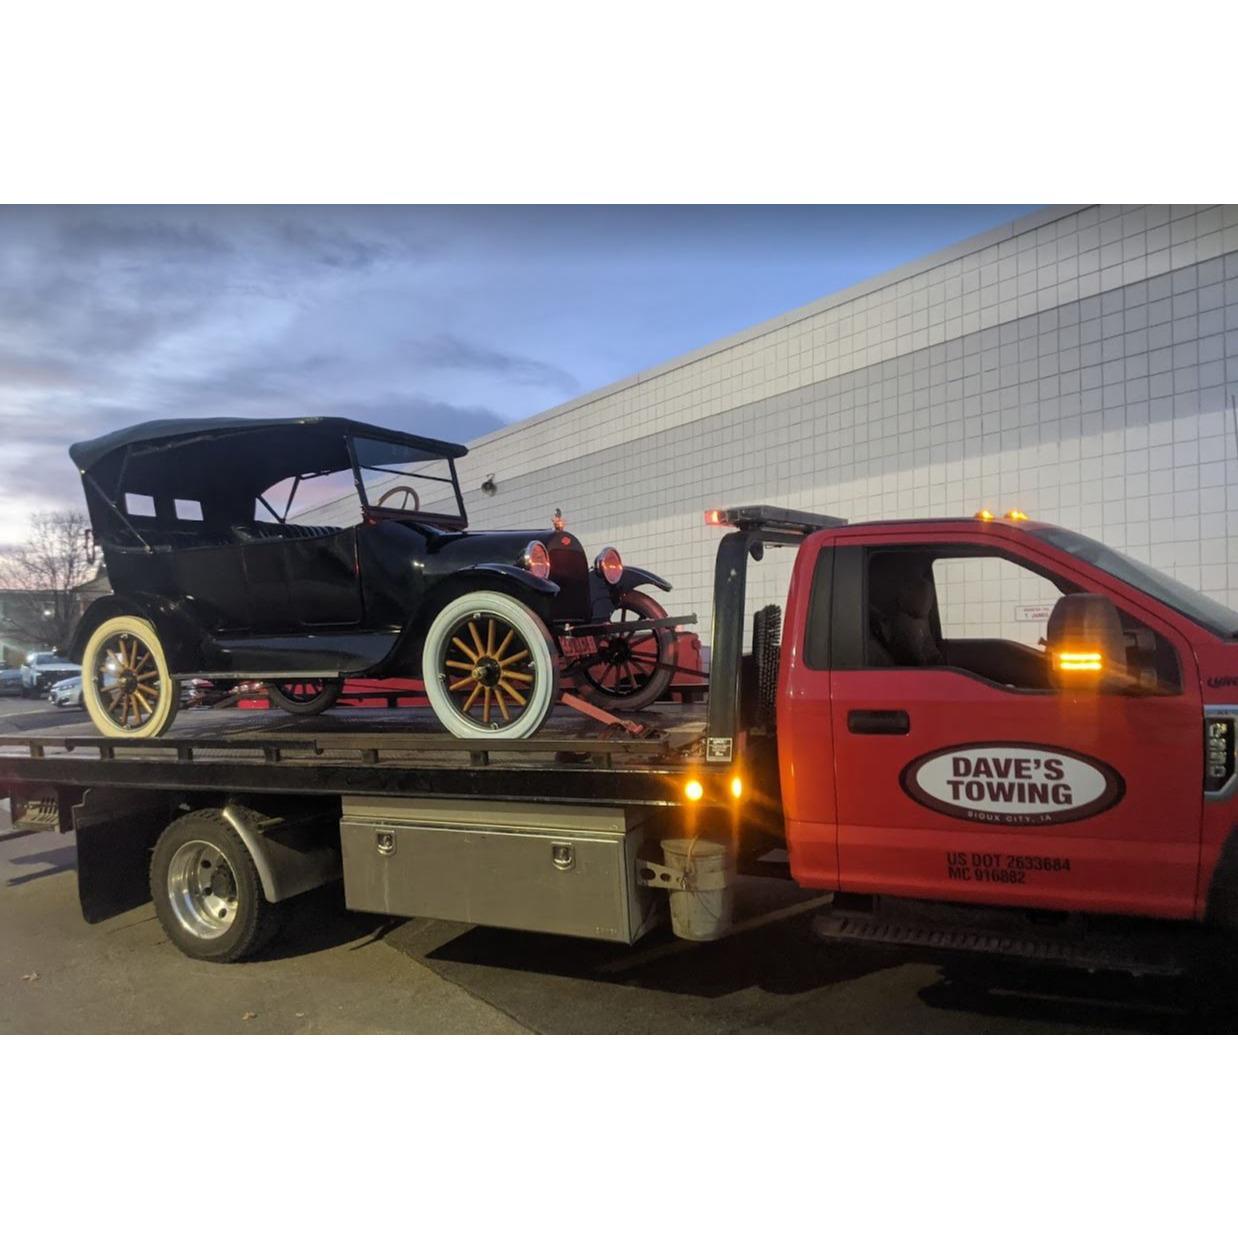 Dave's Towing - Sioux City, IA 51109 - (712)277-1044 | ShowMeLocal.com